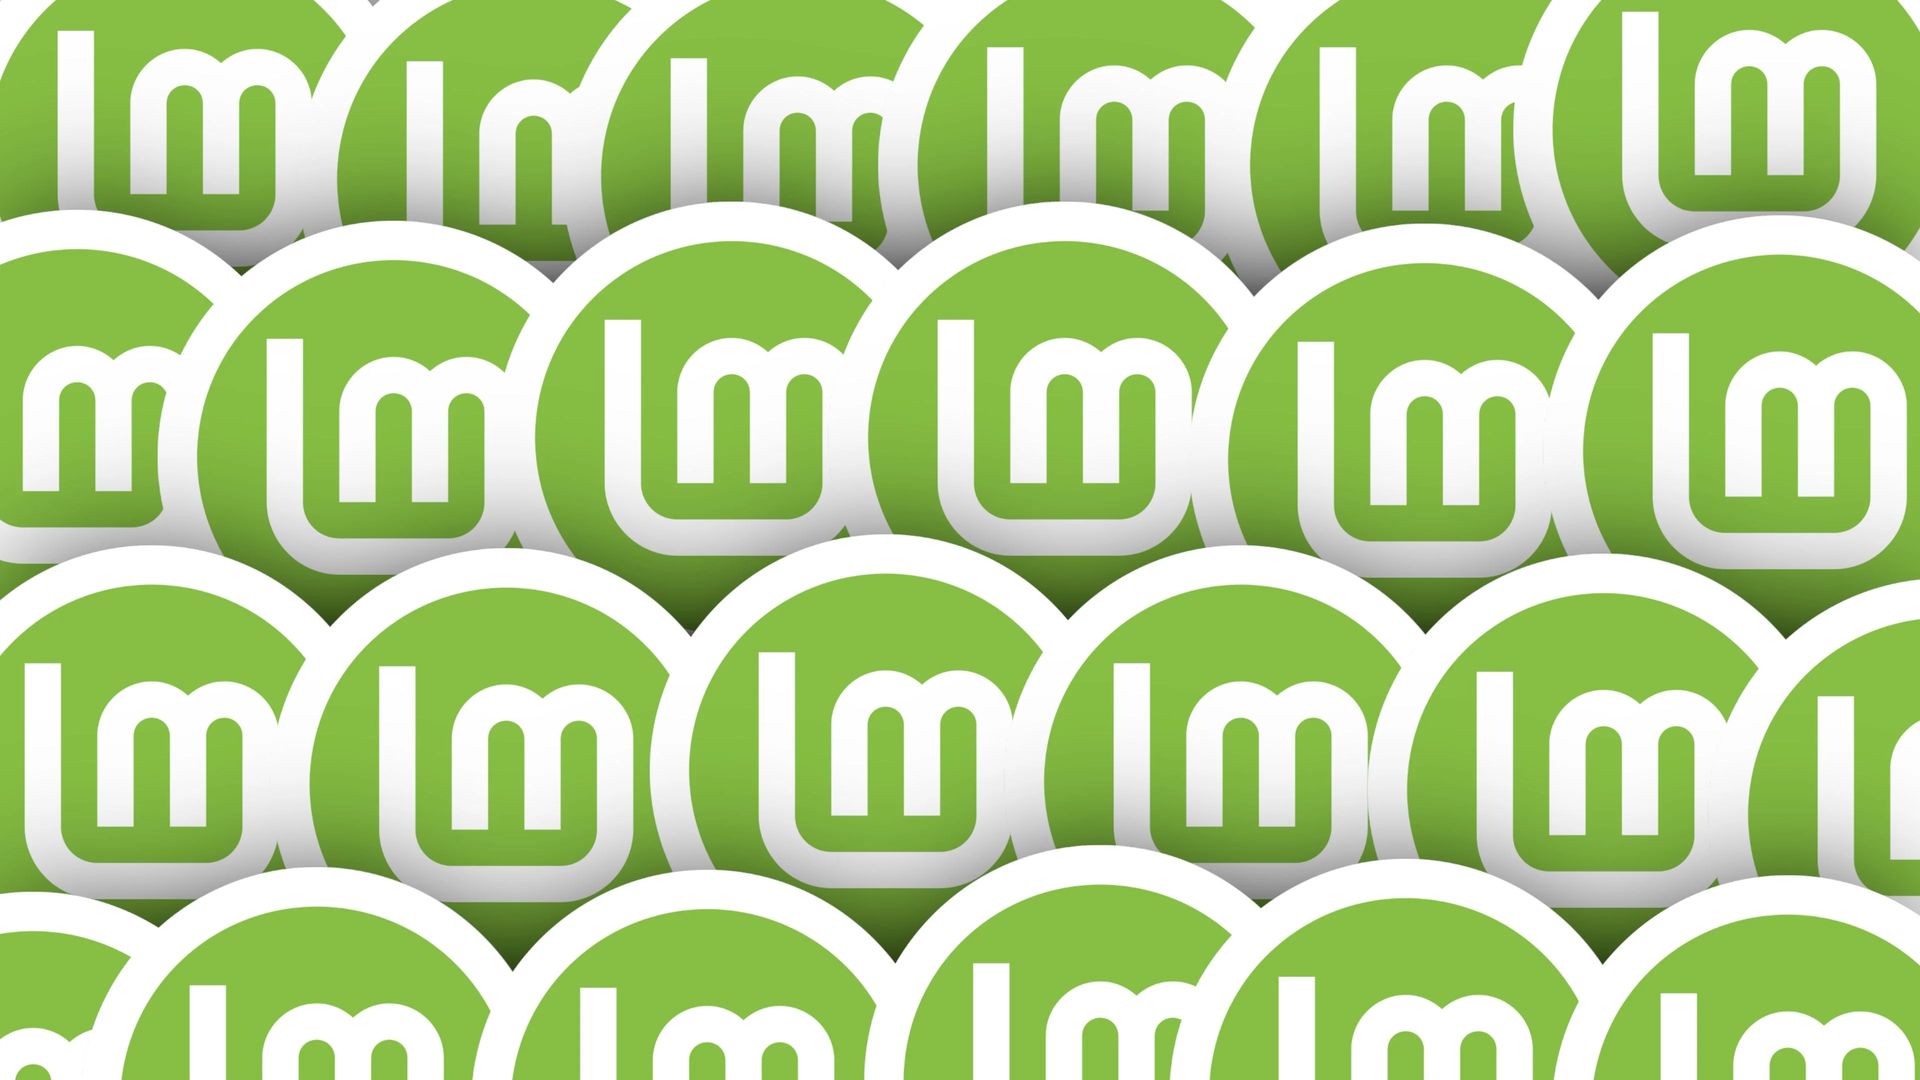 Explore the new Linux Mint 21.3 features: Experimental Wayland support, desktop refinements, performance, and more. 